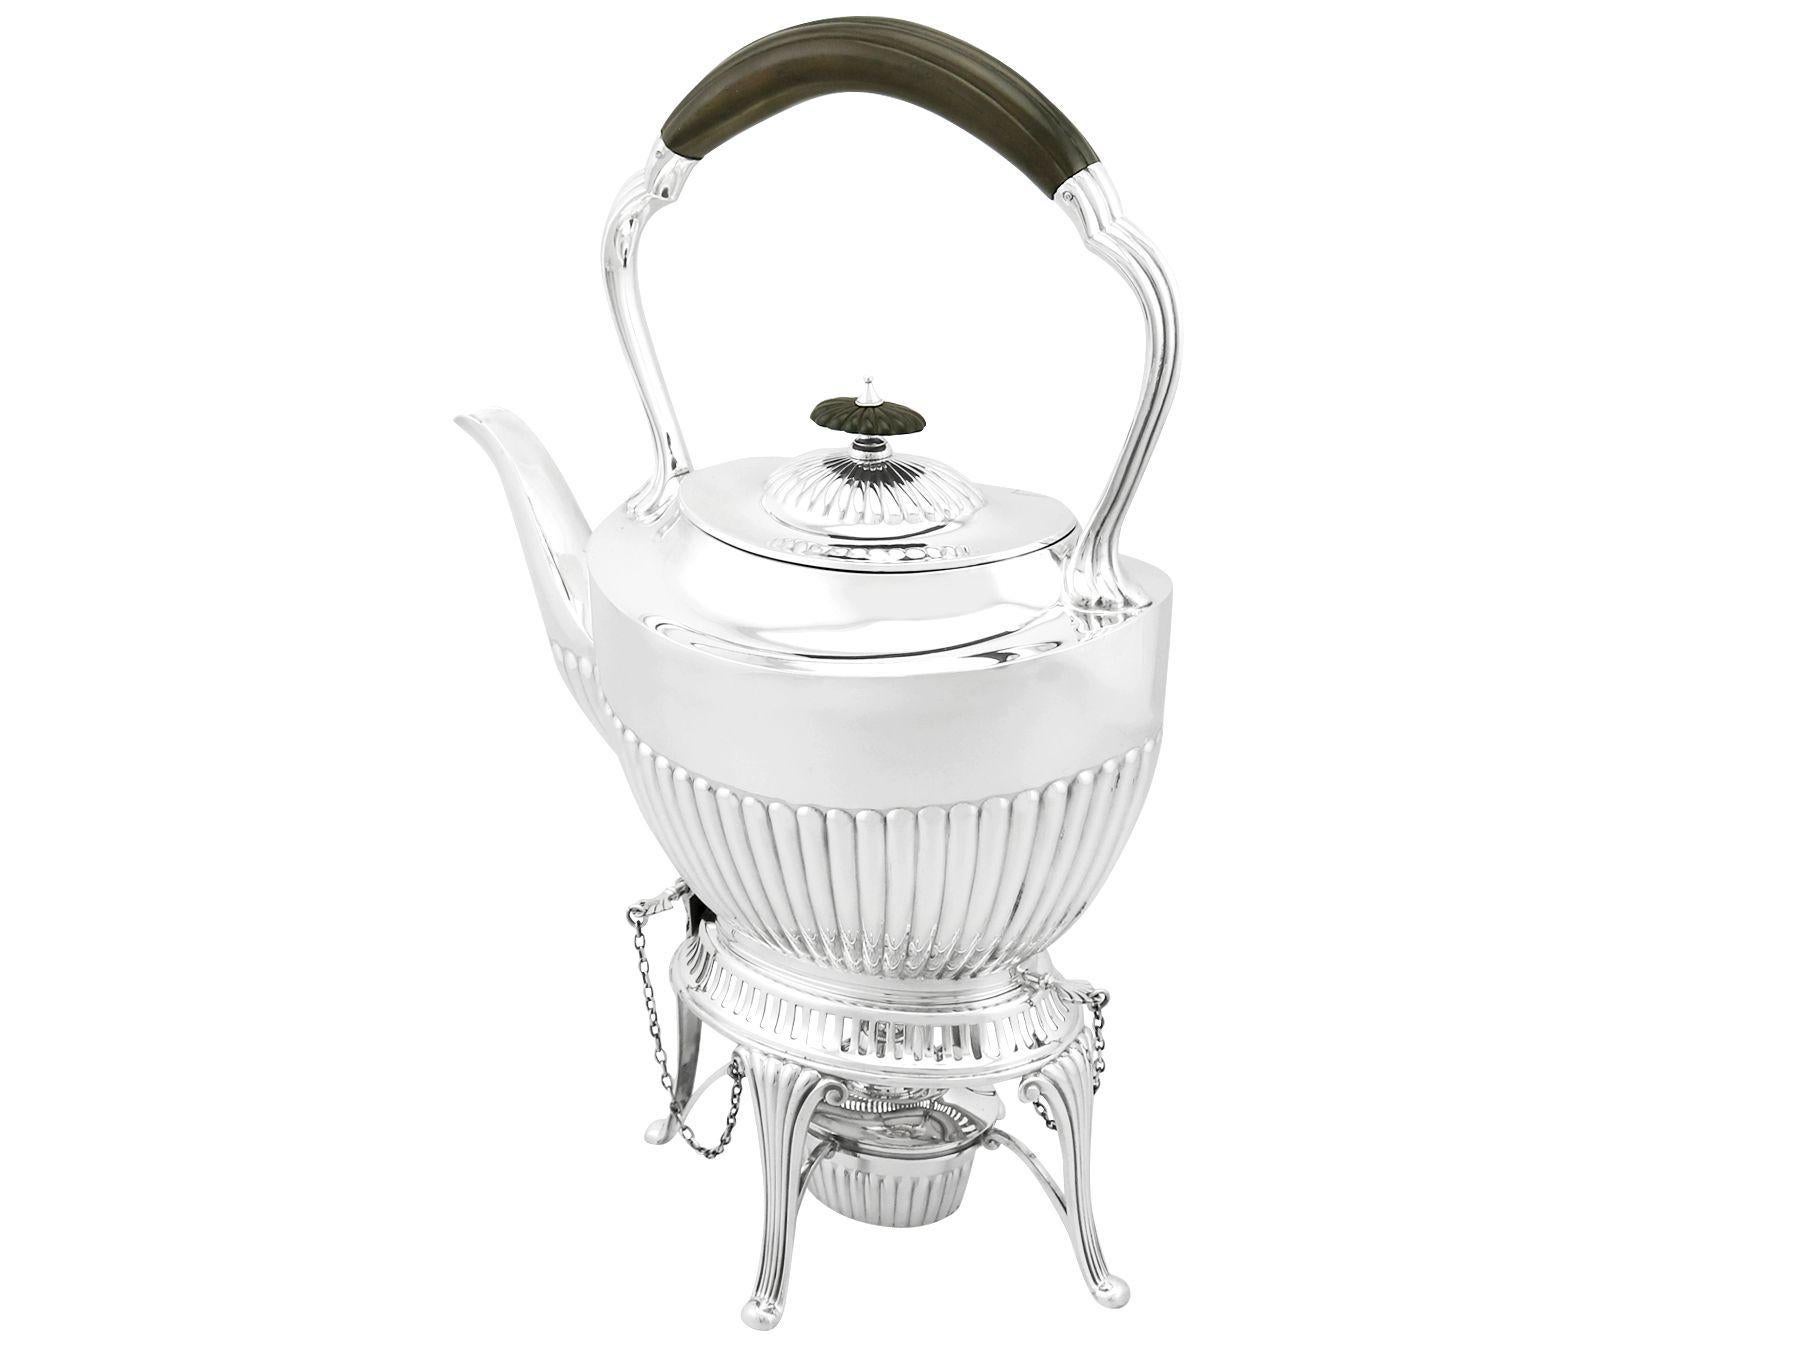 An exceptional, fine and impressive antique Edwardian English sterling silver spirit tea kettle made in the Queen Anne style; an addition to our antique silver teaware collection.

This exceptional antique Edwardian silver spirit kettle, in